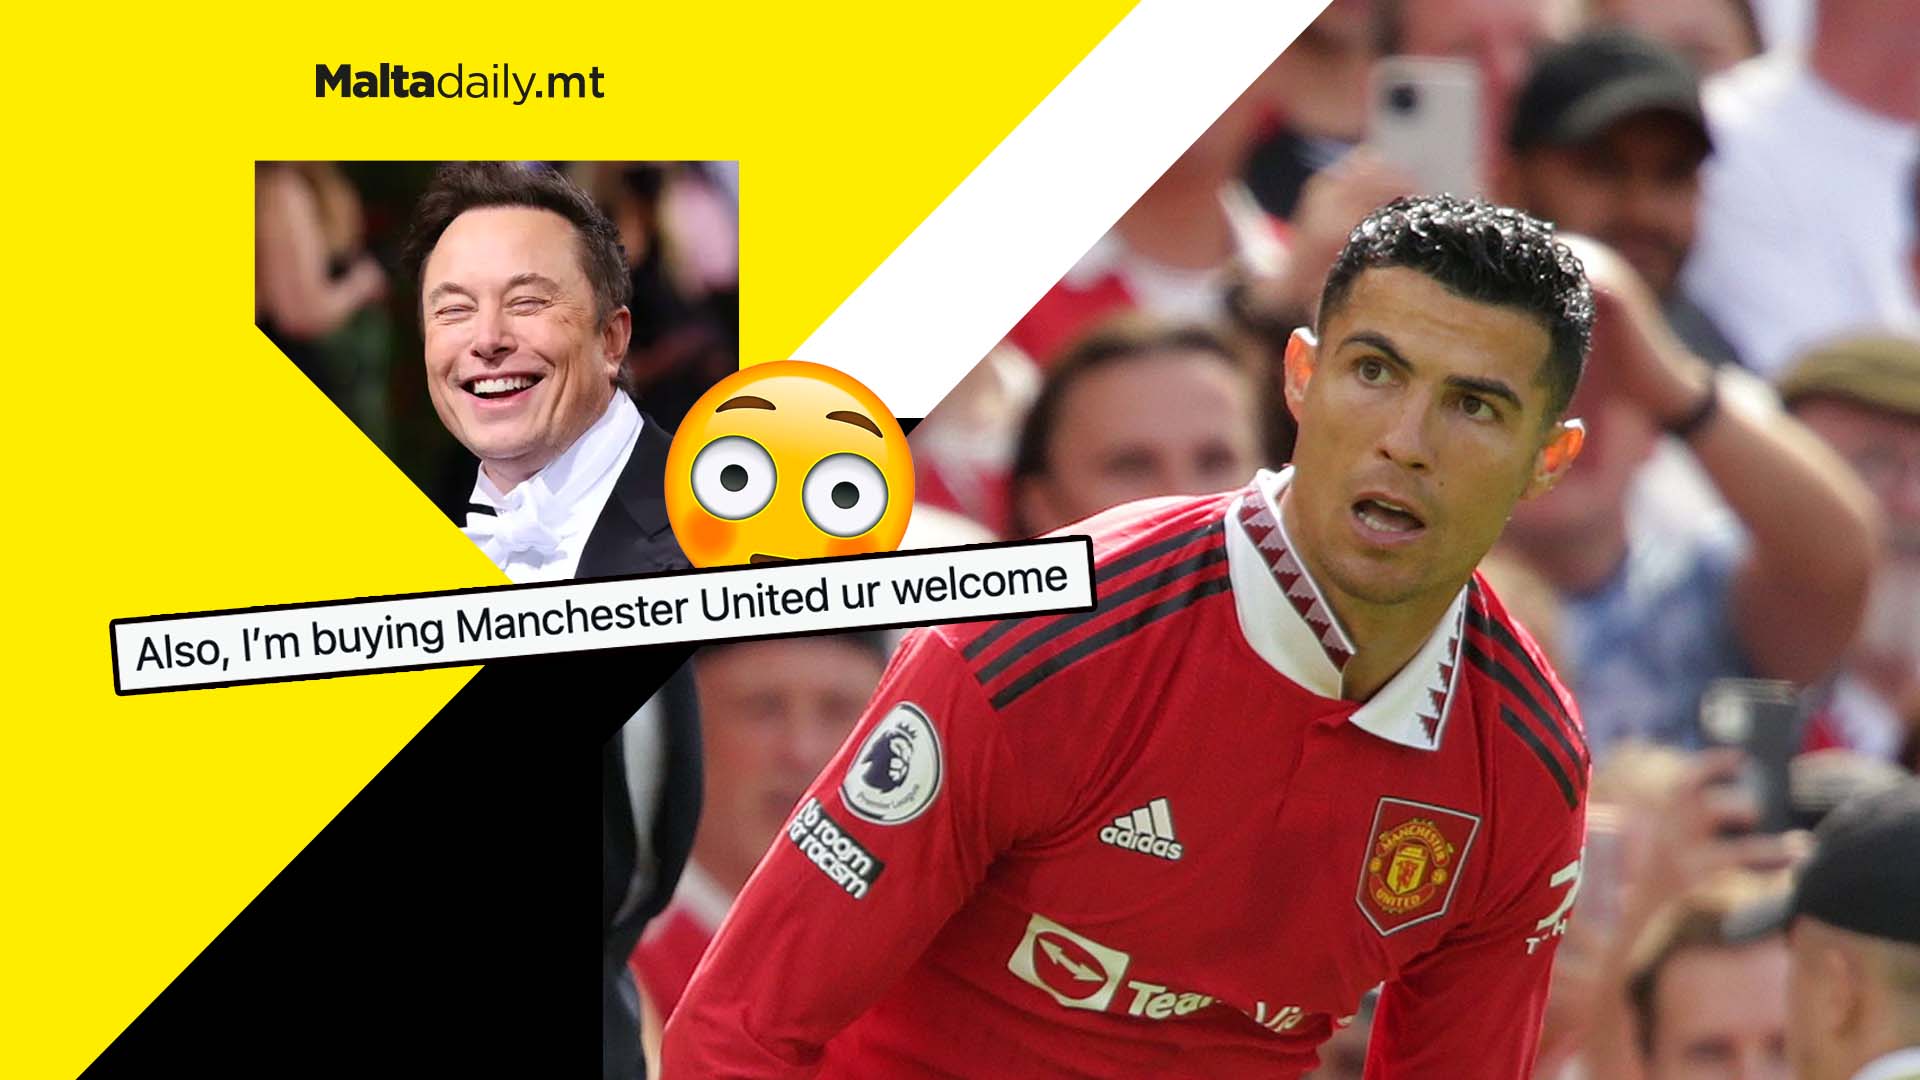 Elon Musk ‘jokes’ about buying Manchester United and breaks internet